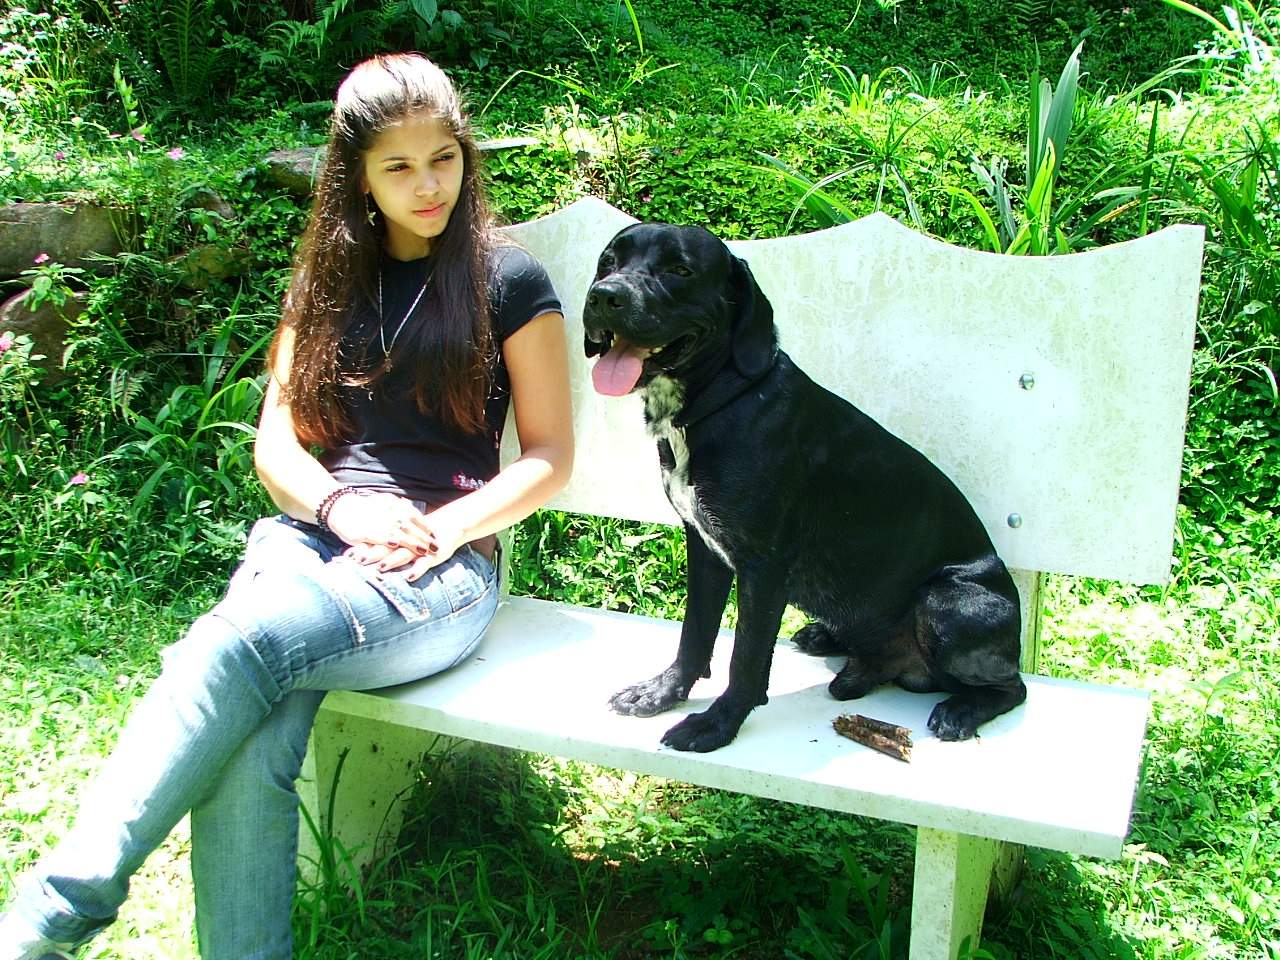 a girl is sitting on a bench next to a dog